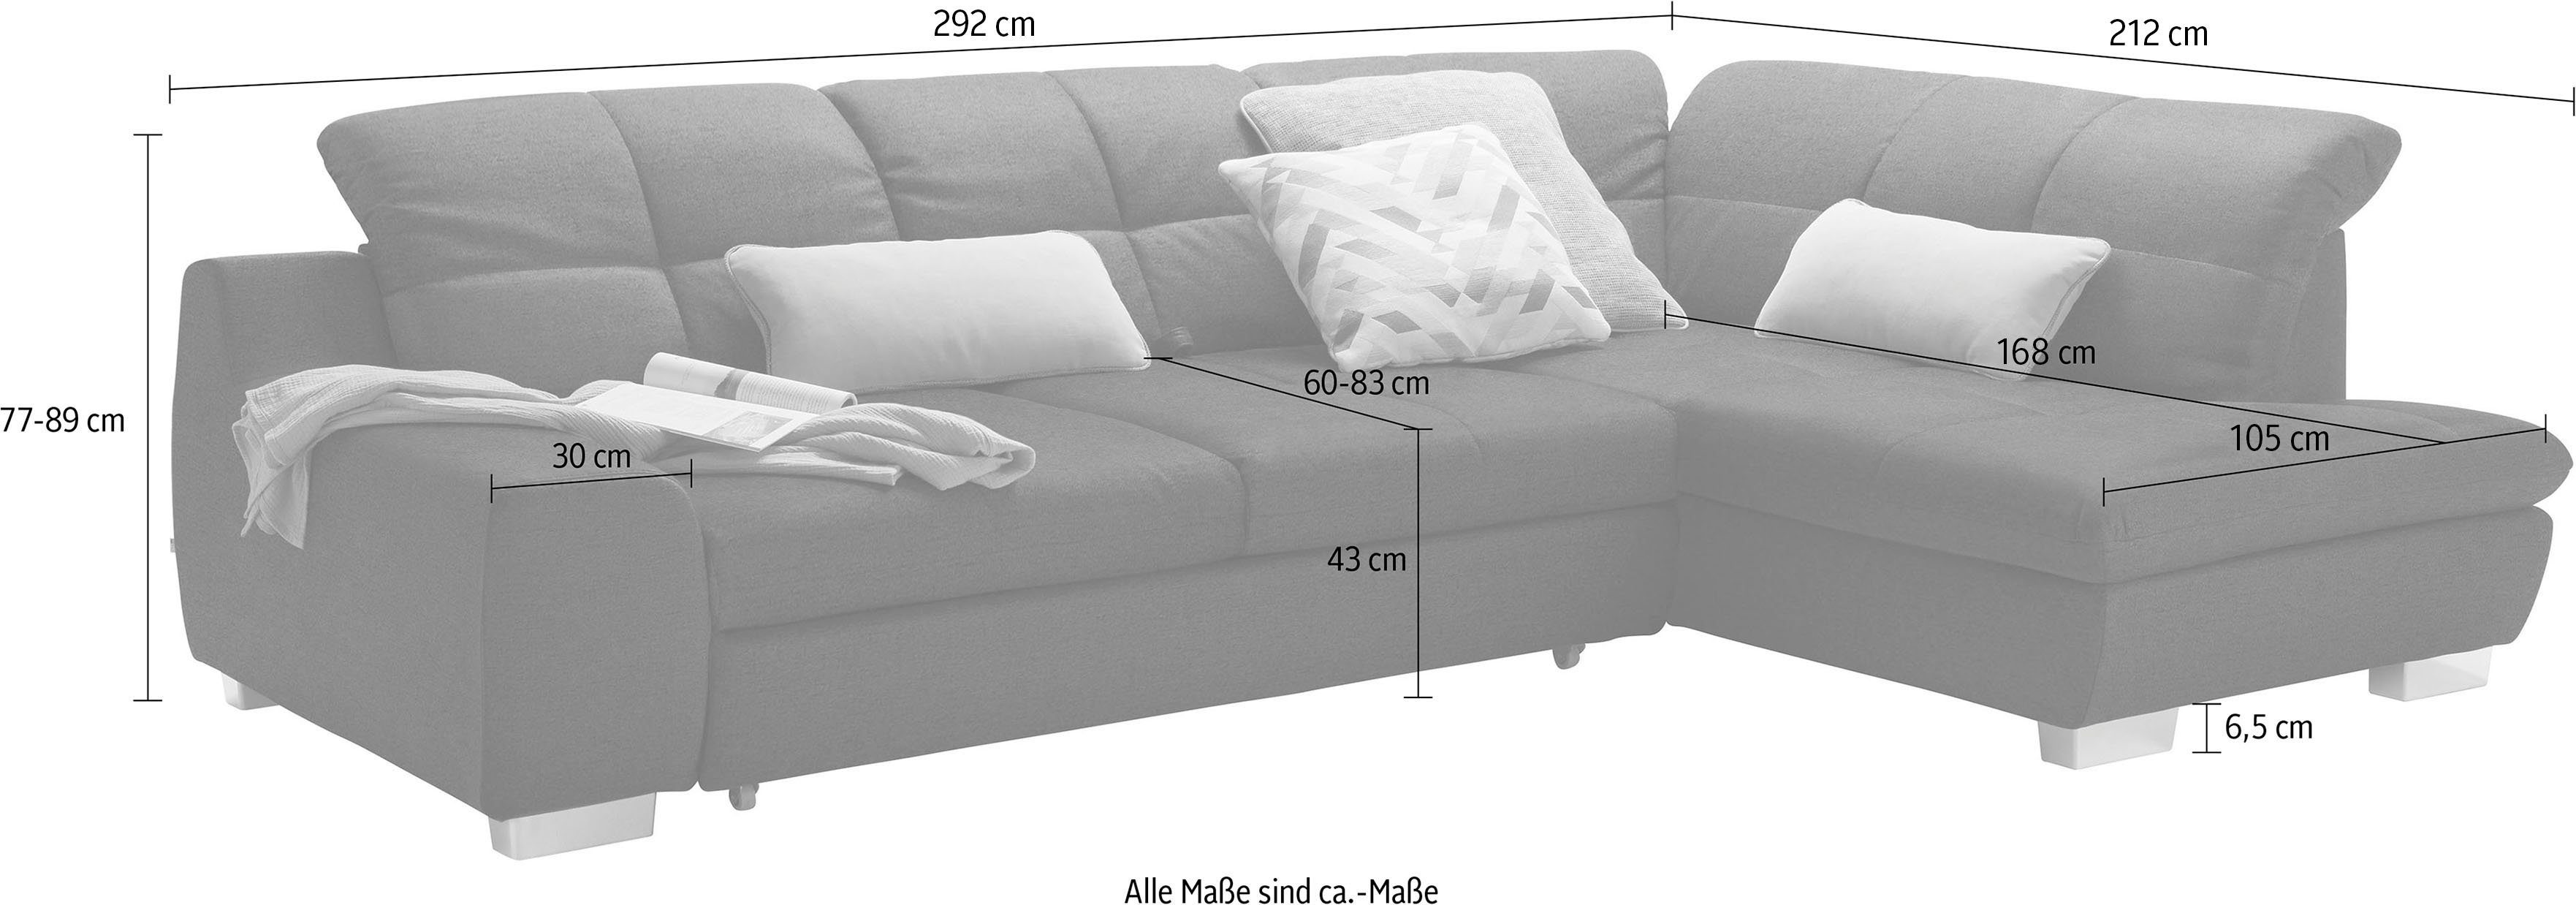 Ecksofa SO wahlweise one Bettfunktion 1200, Musterring set by mit